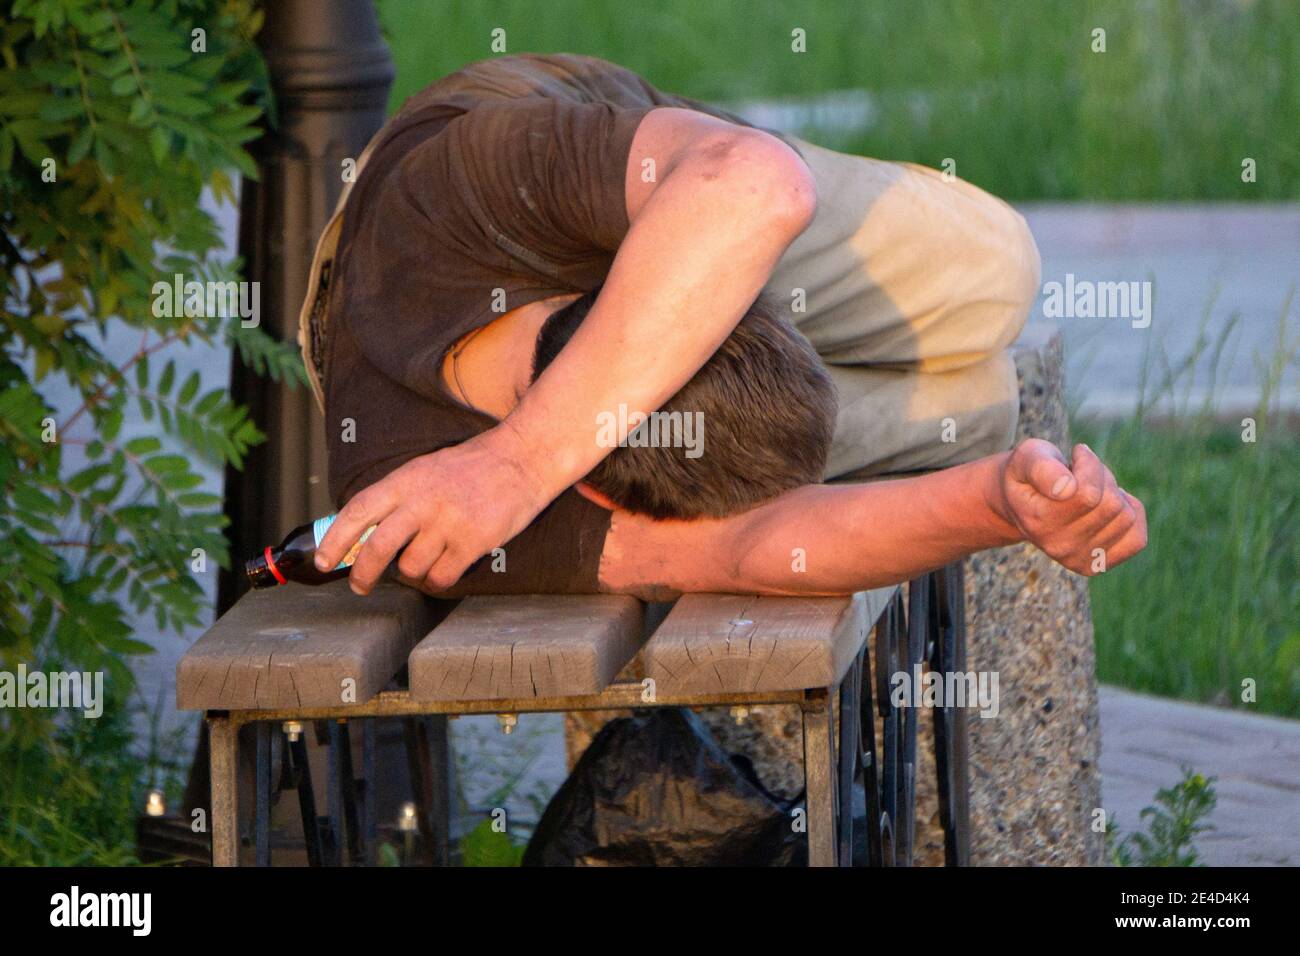 Homeless man fallen down on the ground next to a bench in the park, experiencing lethargy after excessive drinking Stock Photo